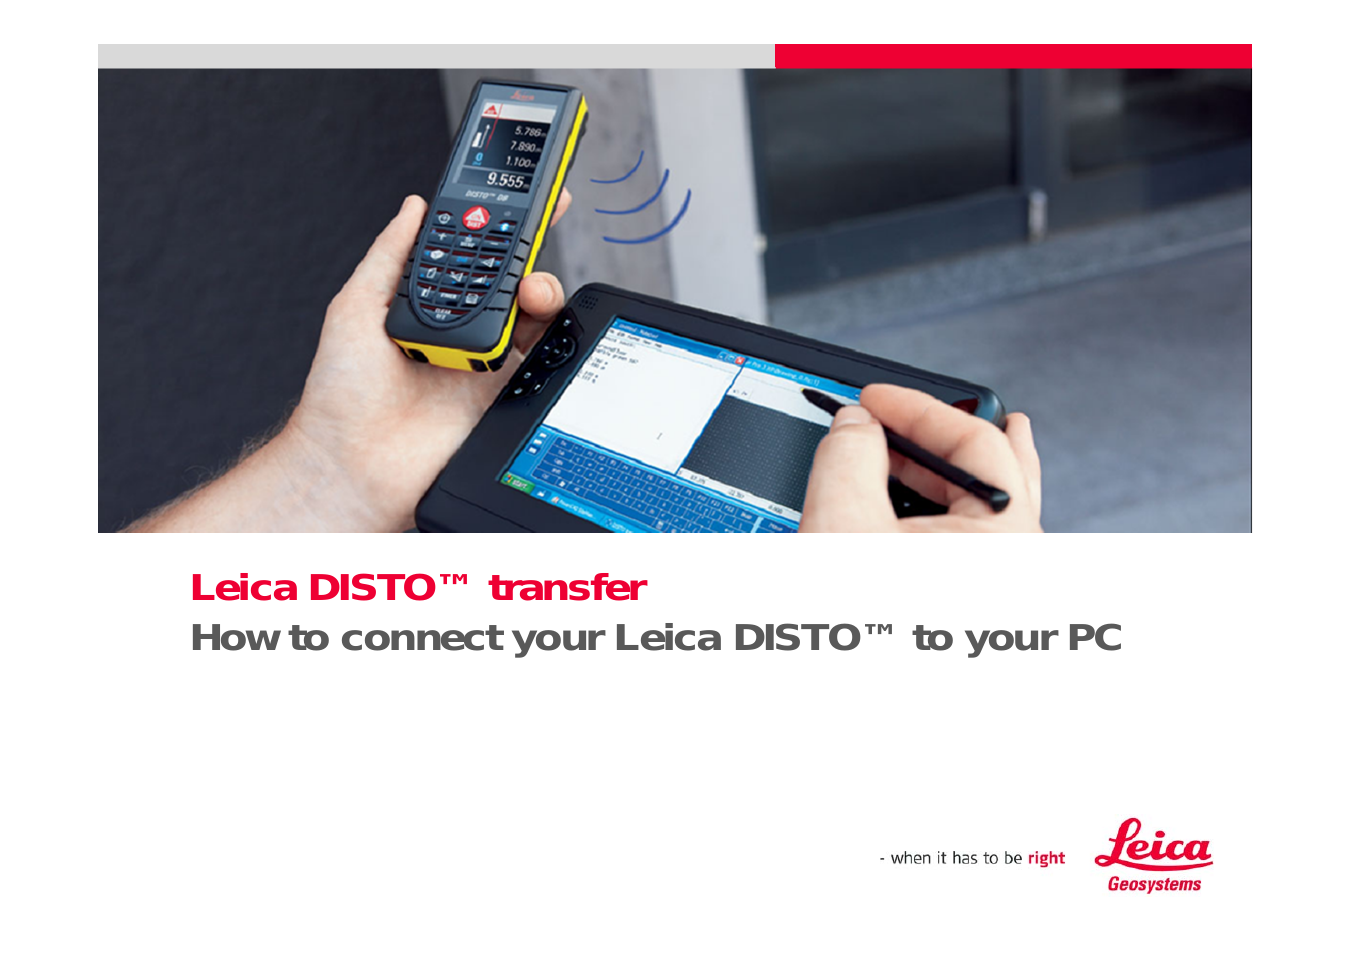 Leica DISTO transfer - How to connect